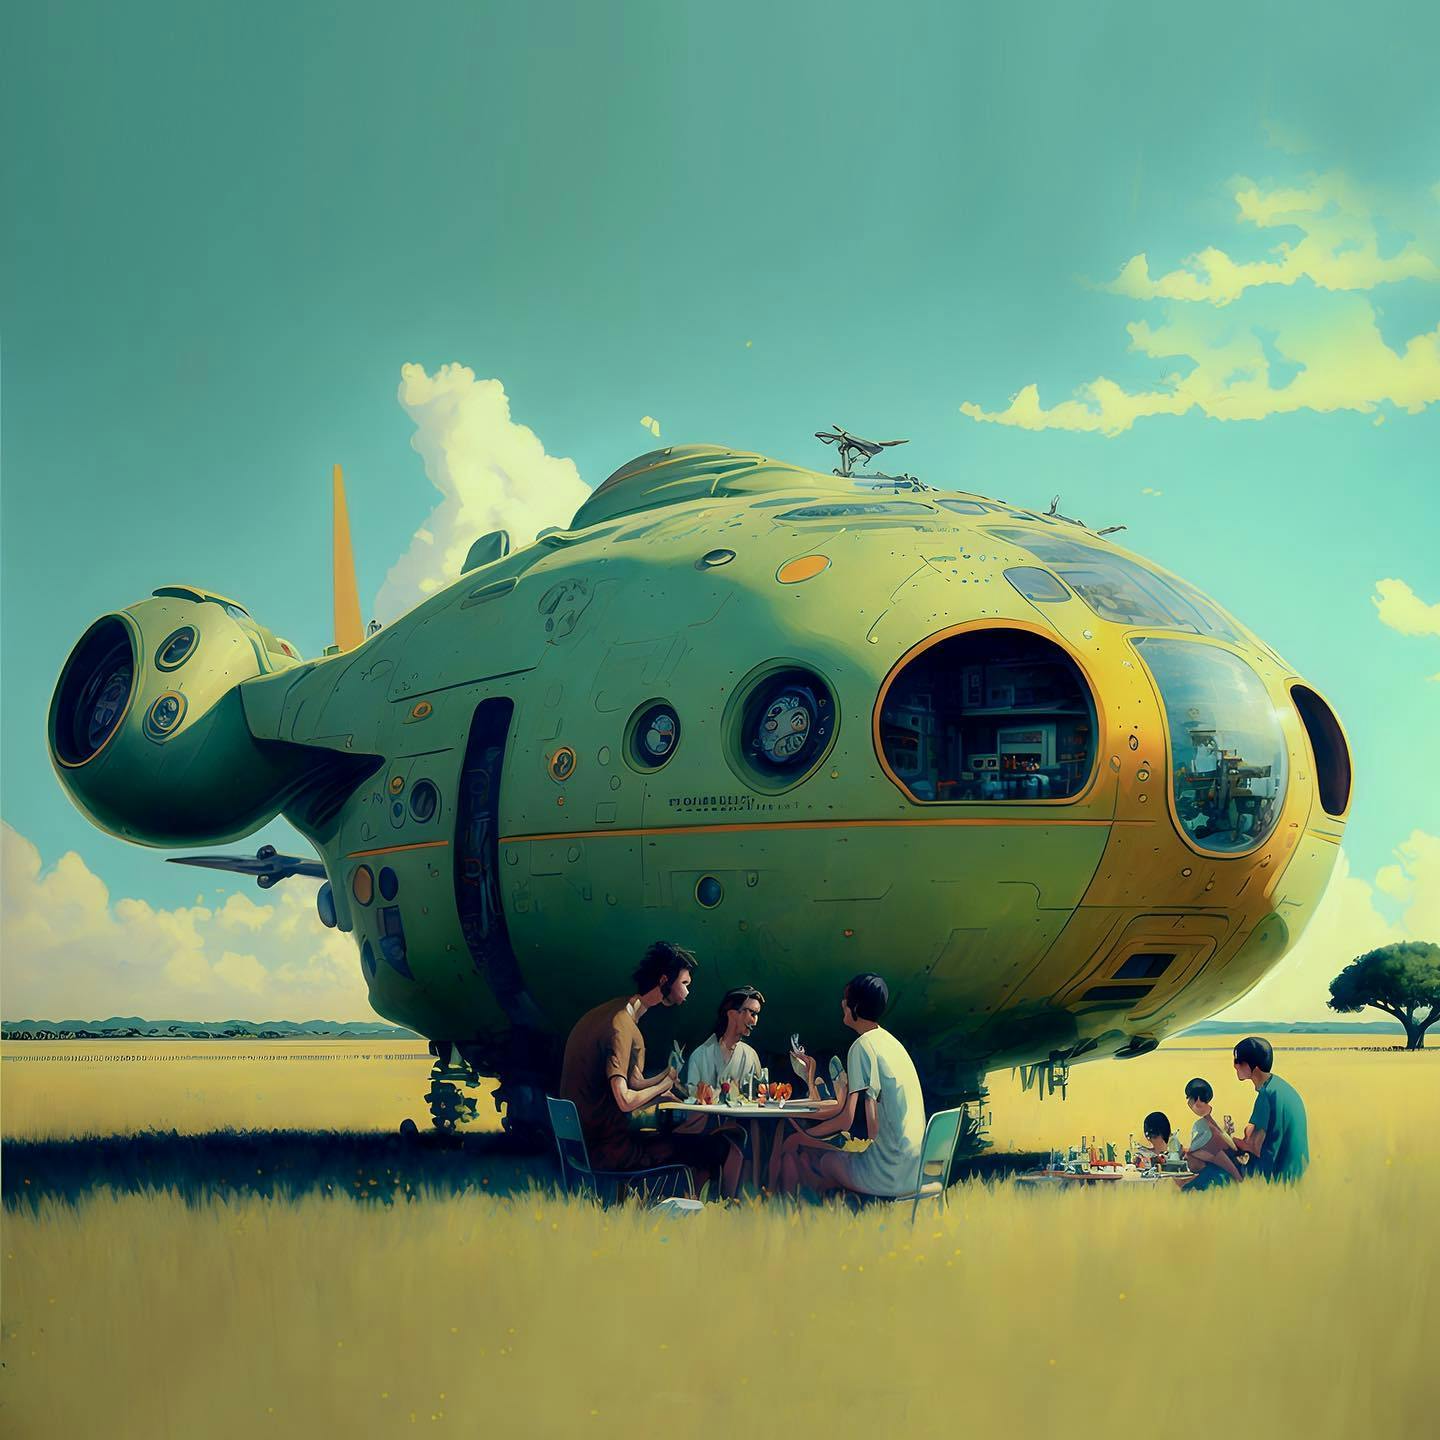 A family picnic in front of their space ship